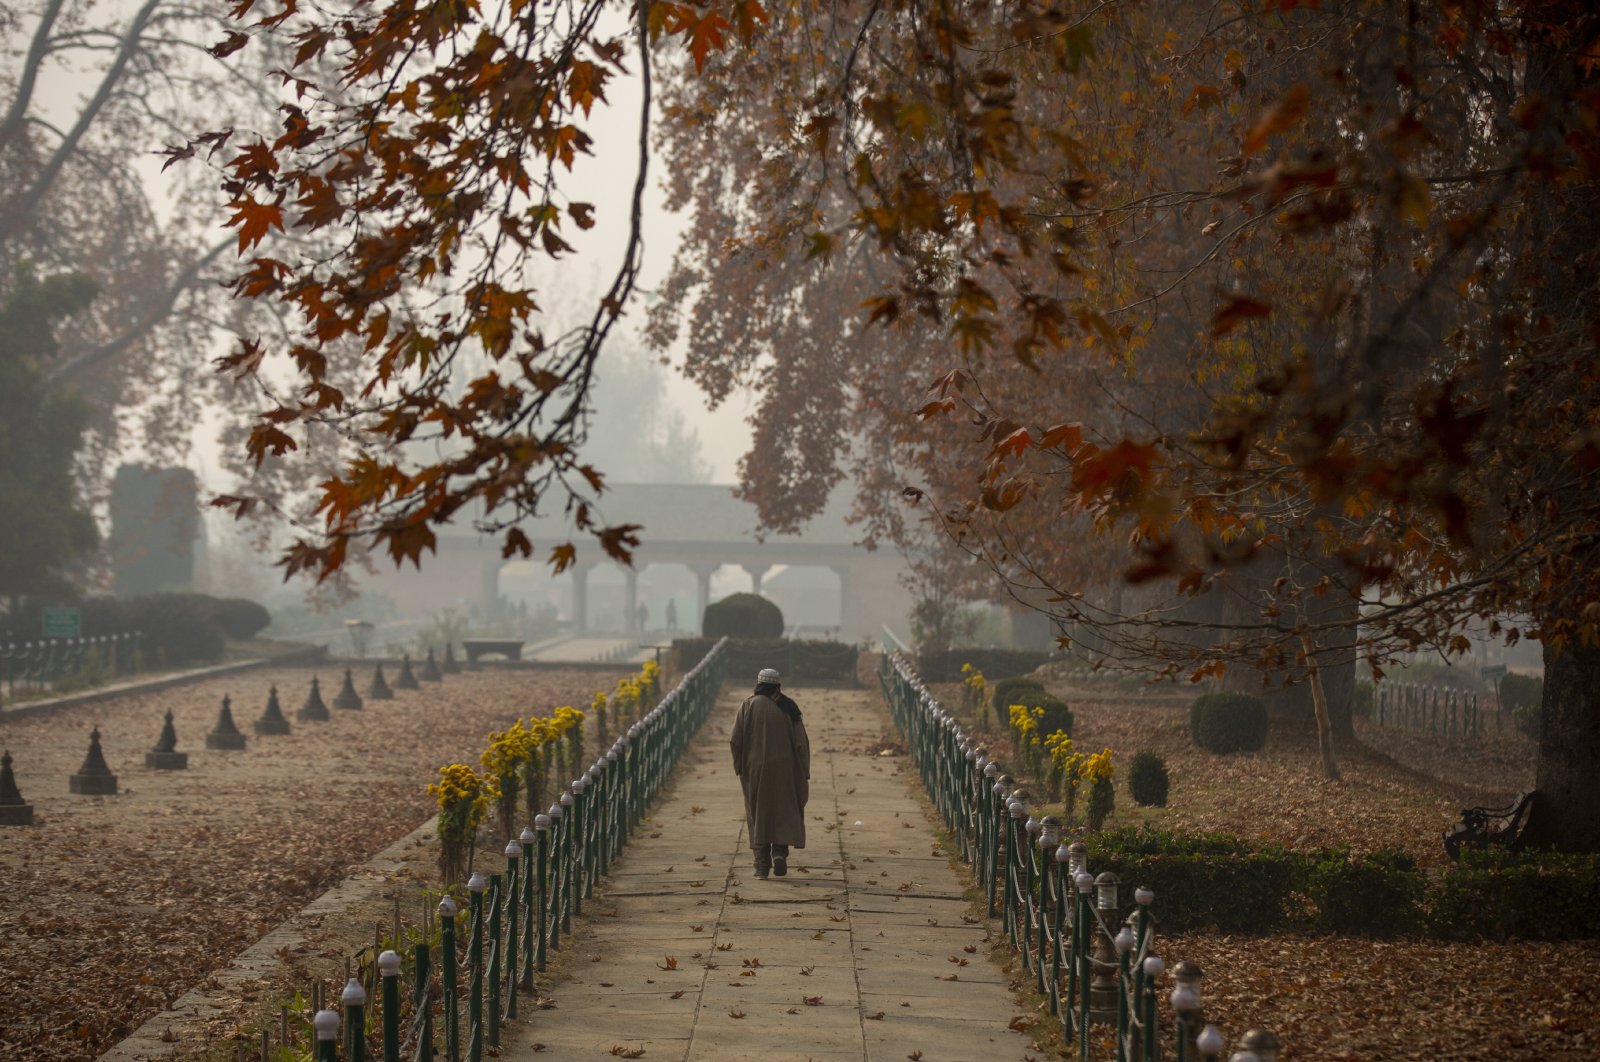 A Kashmiri man walks in a garden covered with fallen Chinar leaves on the outskirts of Srinagar, Indian-occupied Jammu and Kashmir, Nov. 11, 2020. (AP Photo)